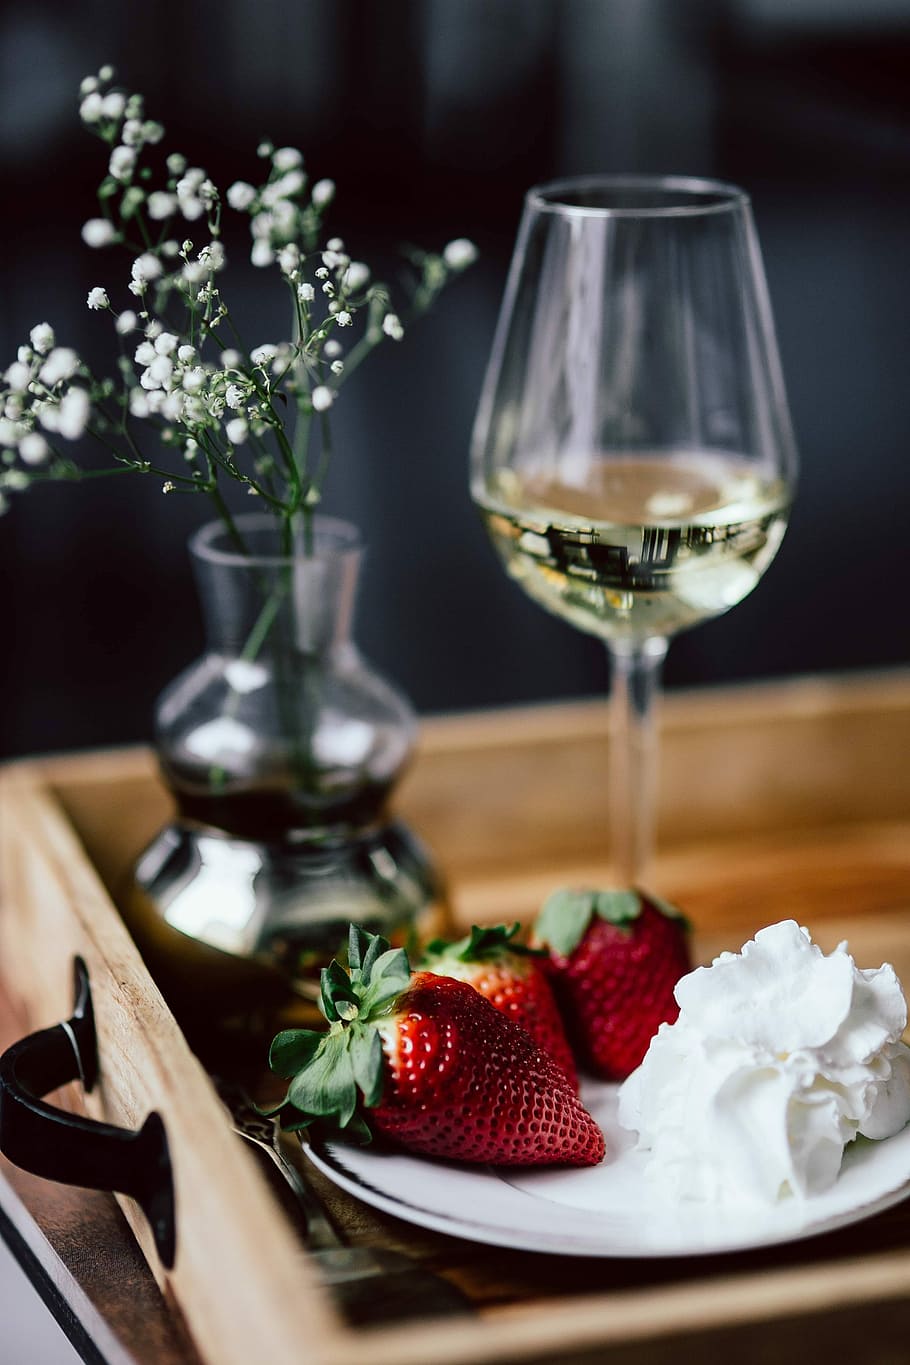 Strawberries with cream and glass of white wine on wooden tray, HD wallpaper